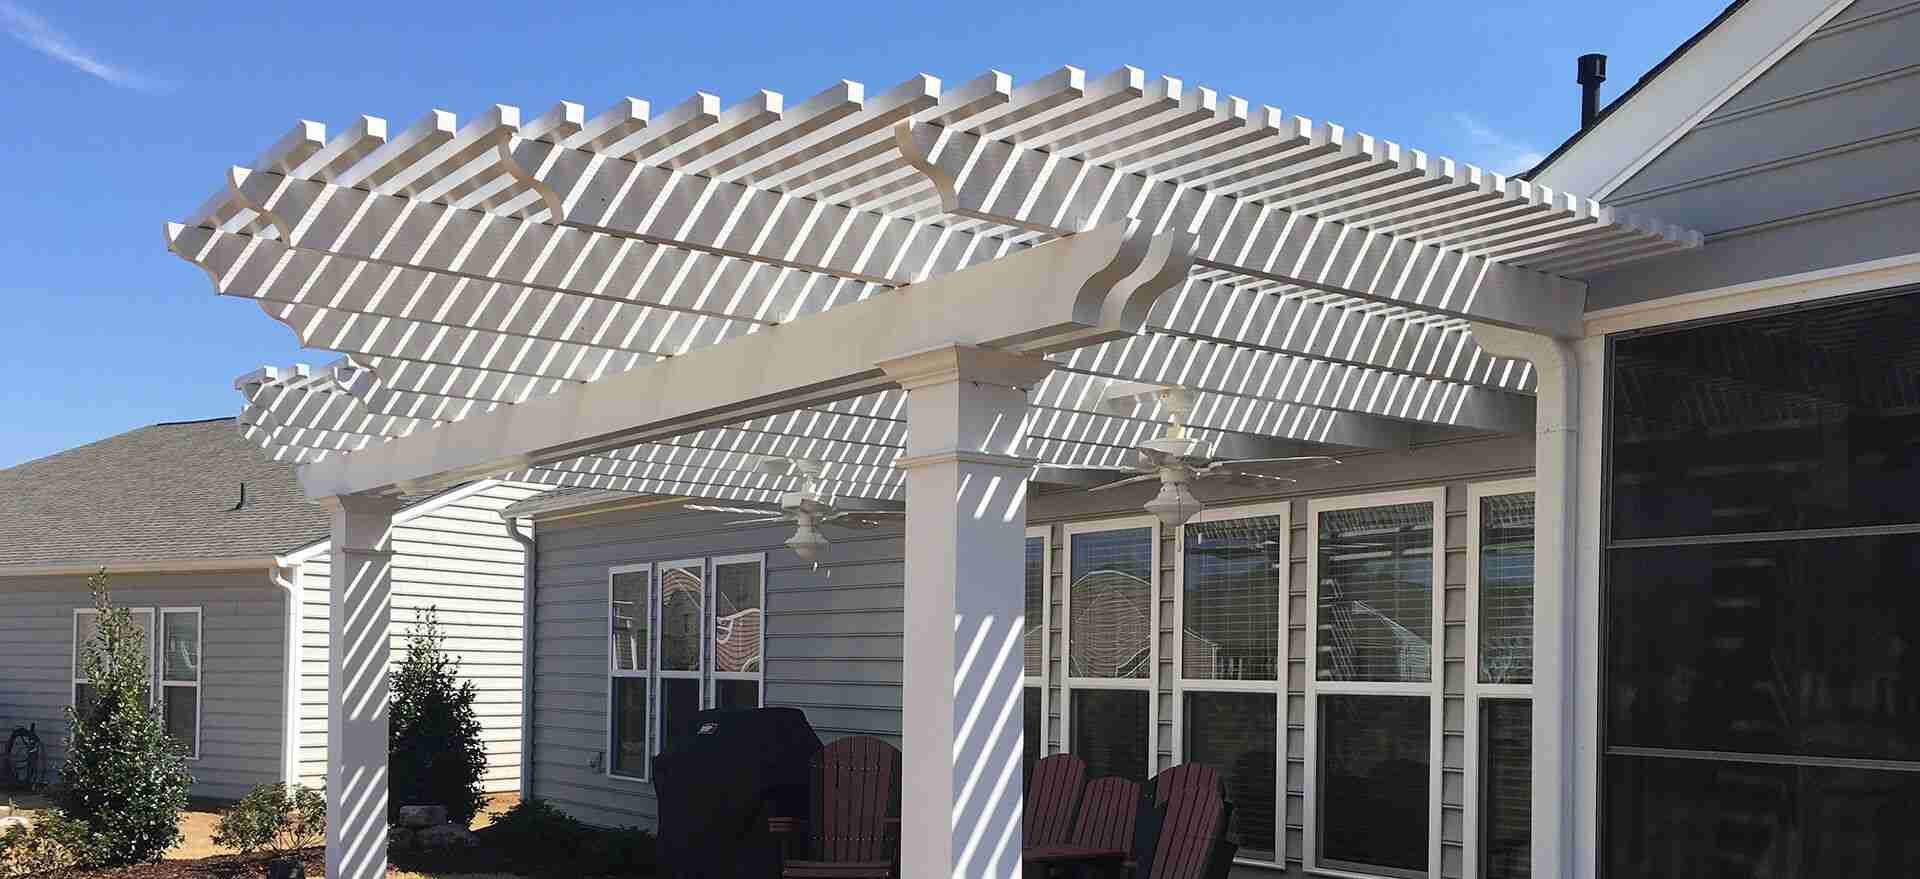 A white wooden pergola attached to a back porch area